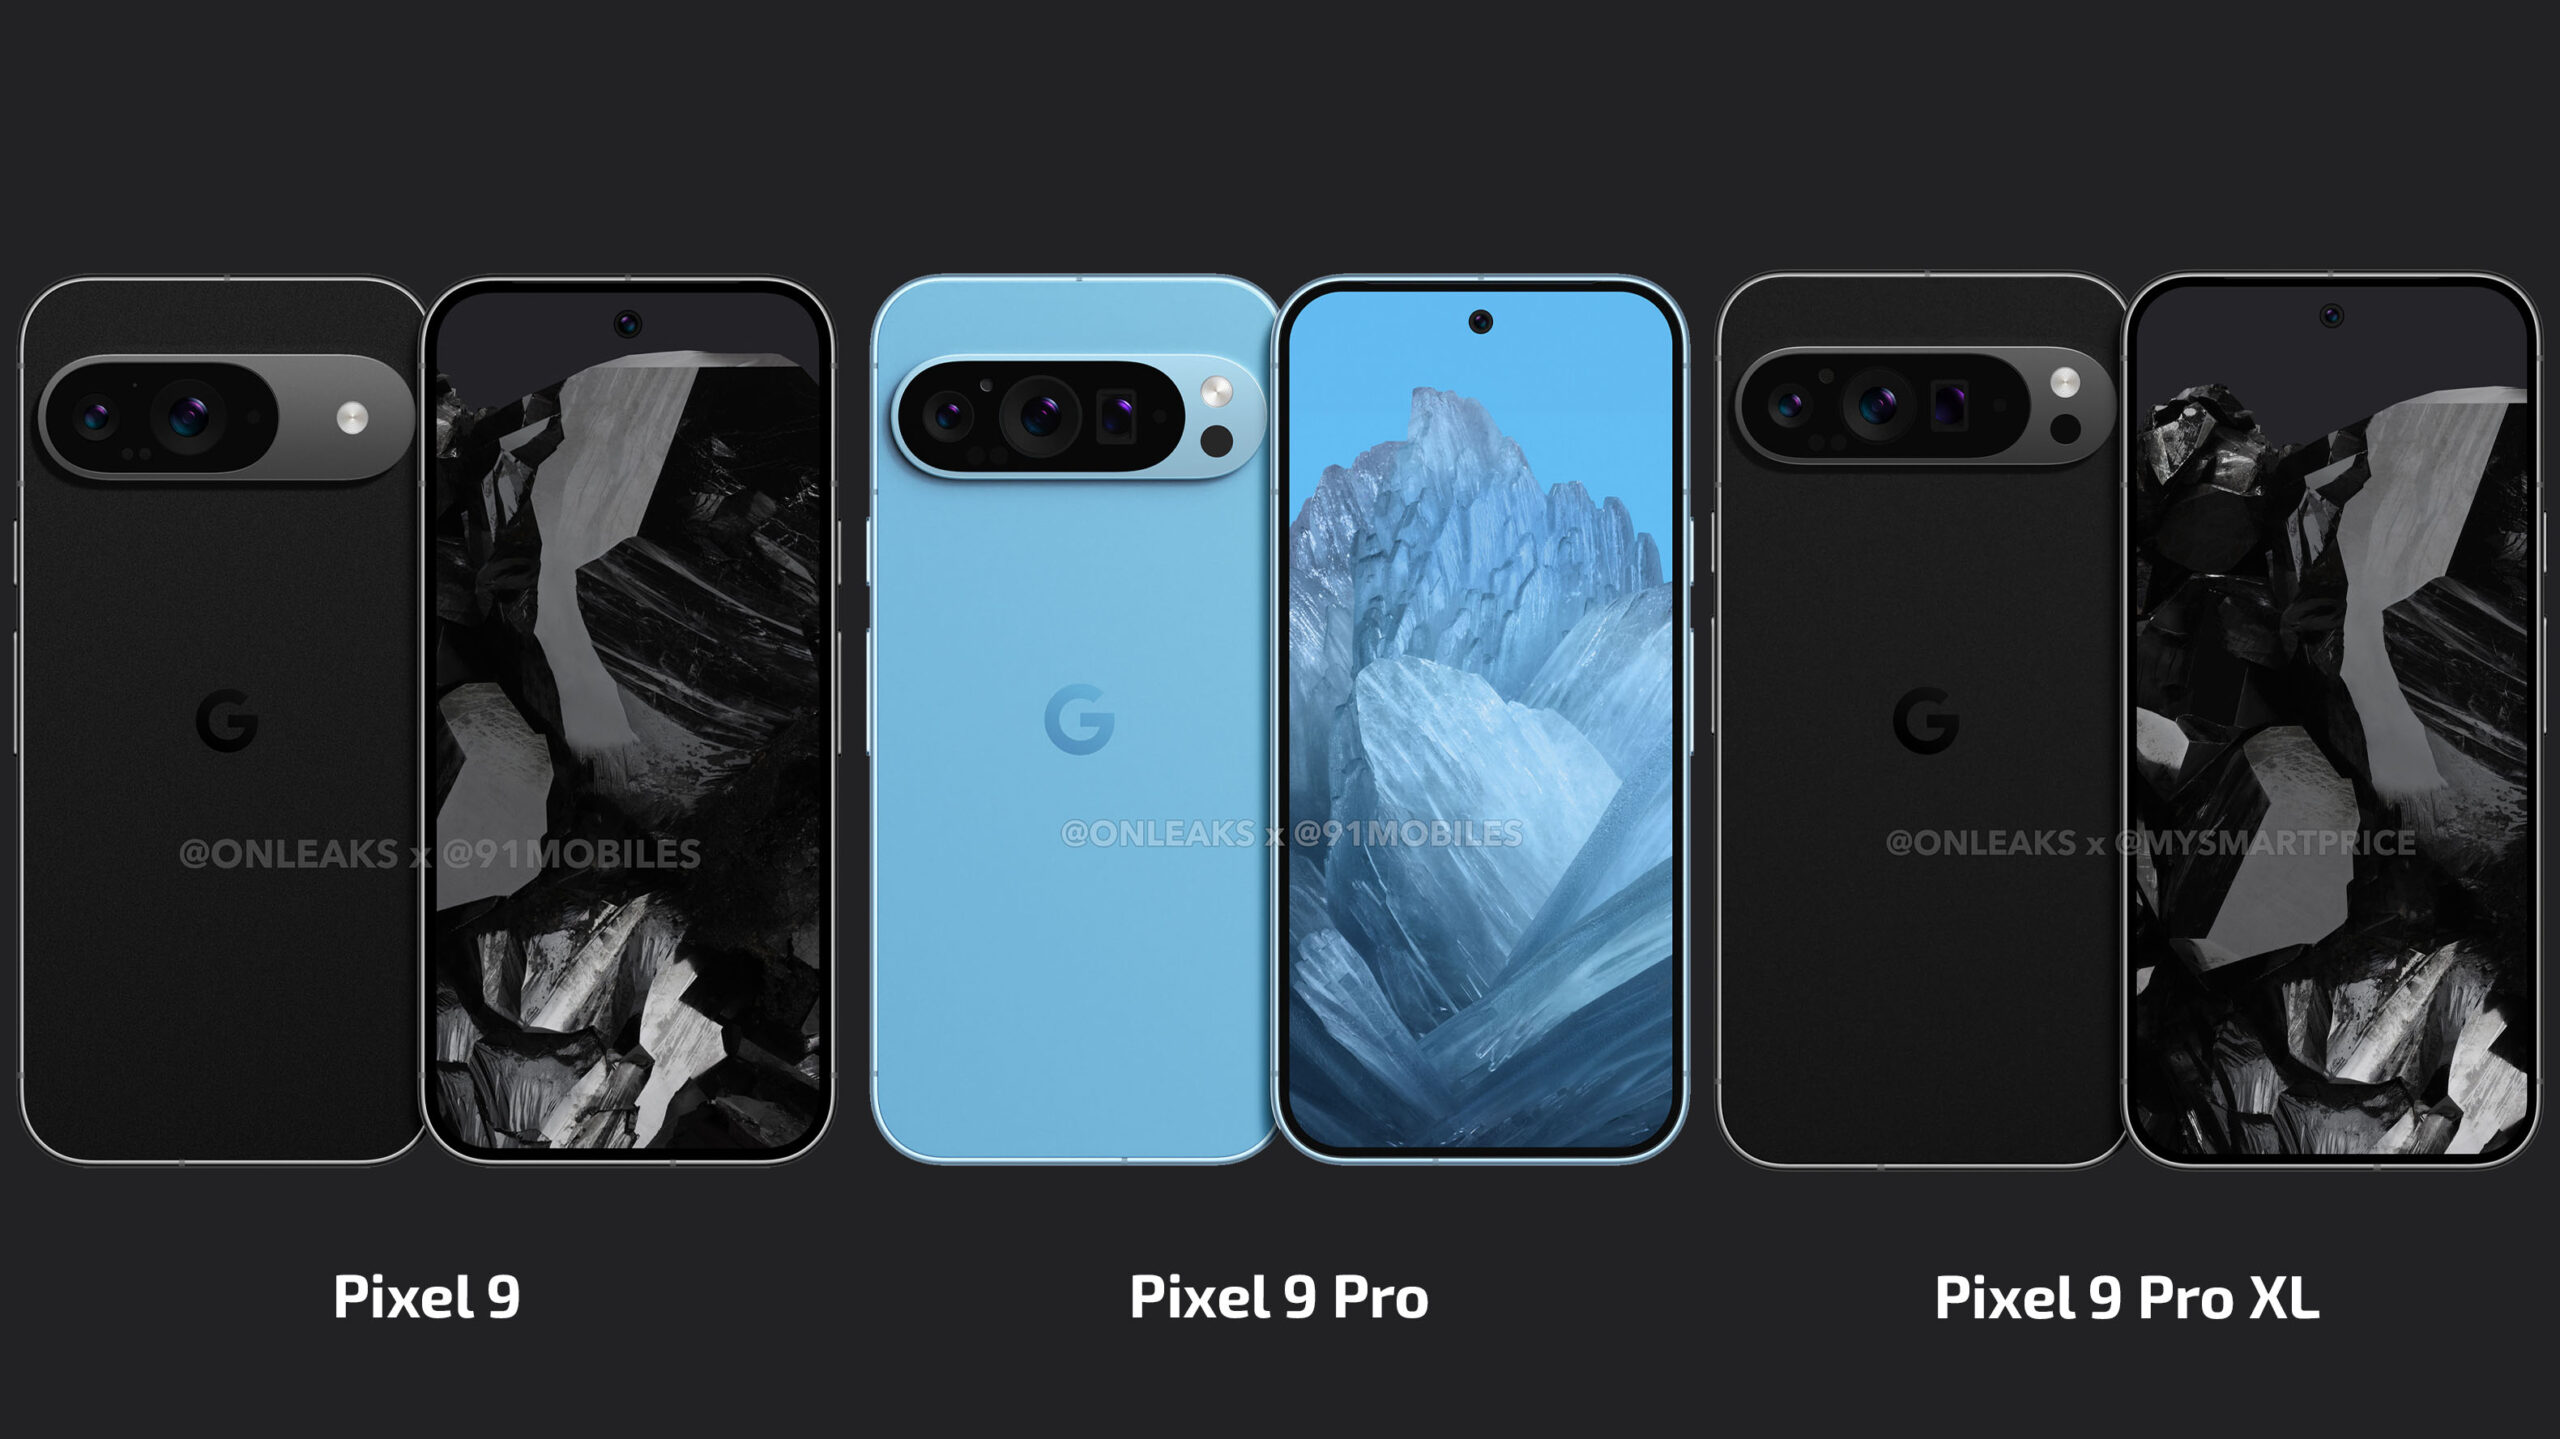 Here’s everything we know so far about Google’s Pixel 9 series